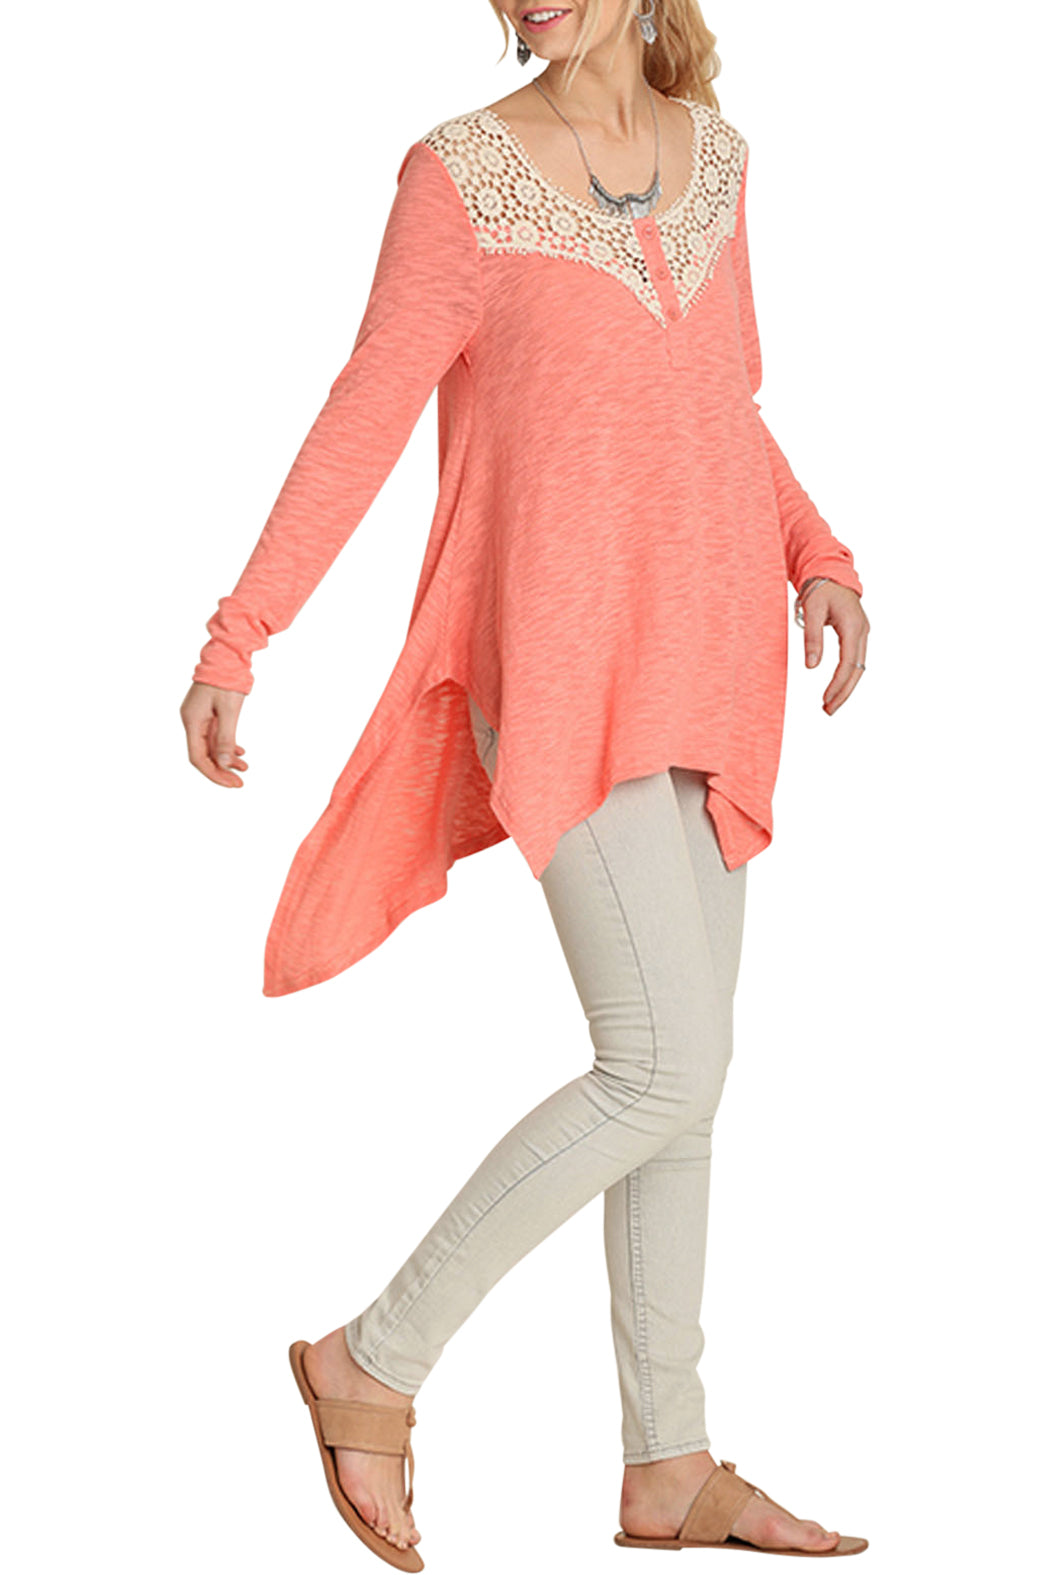 boho top, crochet inserted neckline with front button, long sleeves, hi-low hemline 